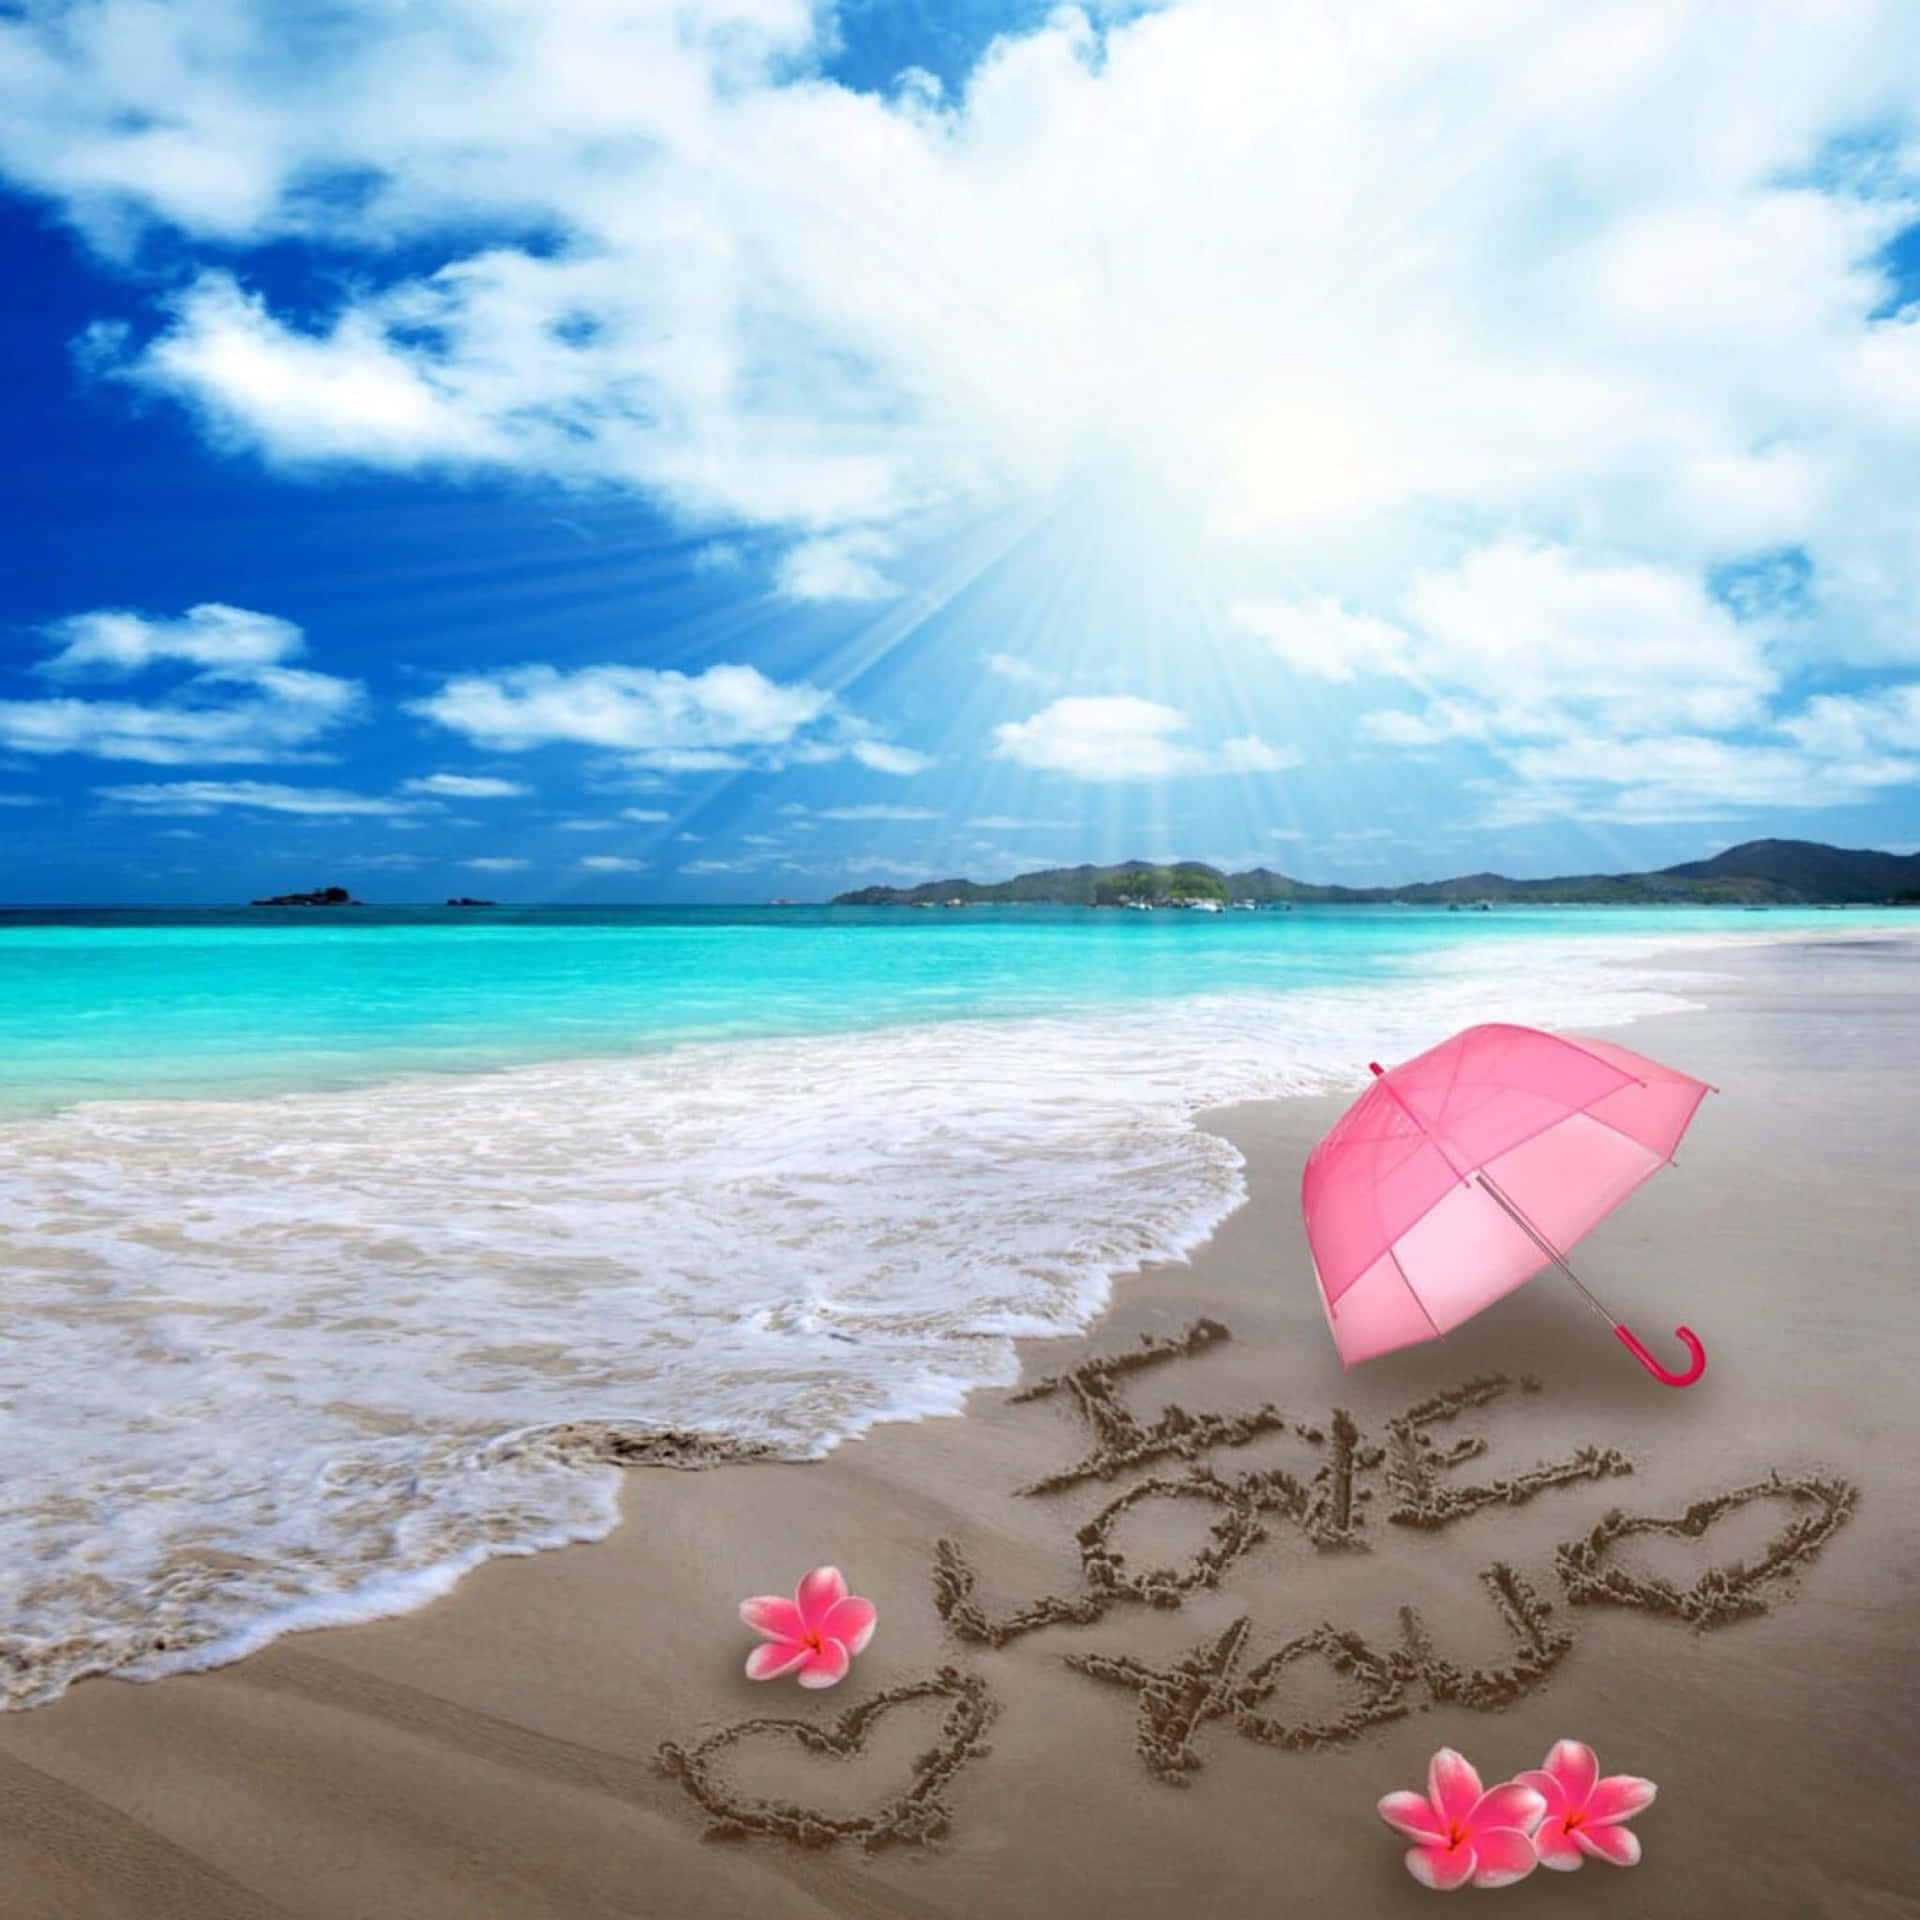 Saying goodbye to summer by the beach - smile! Wallpaper